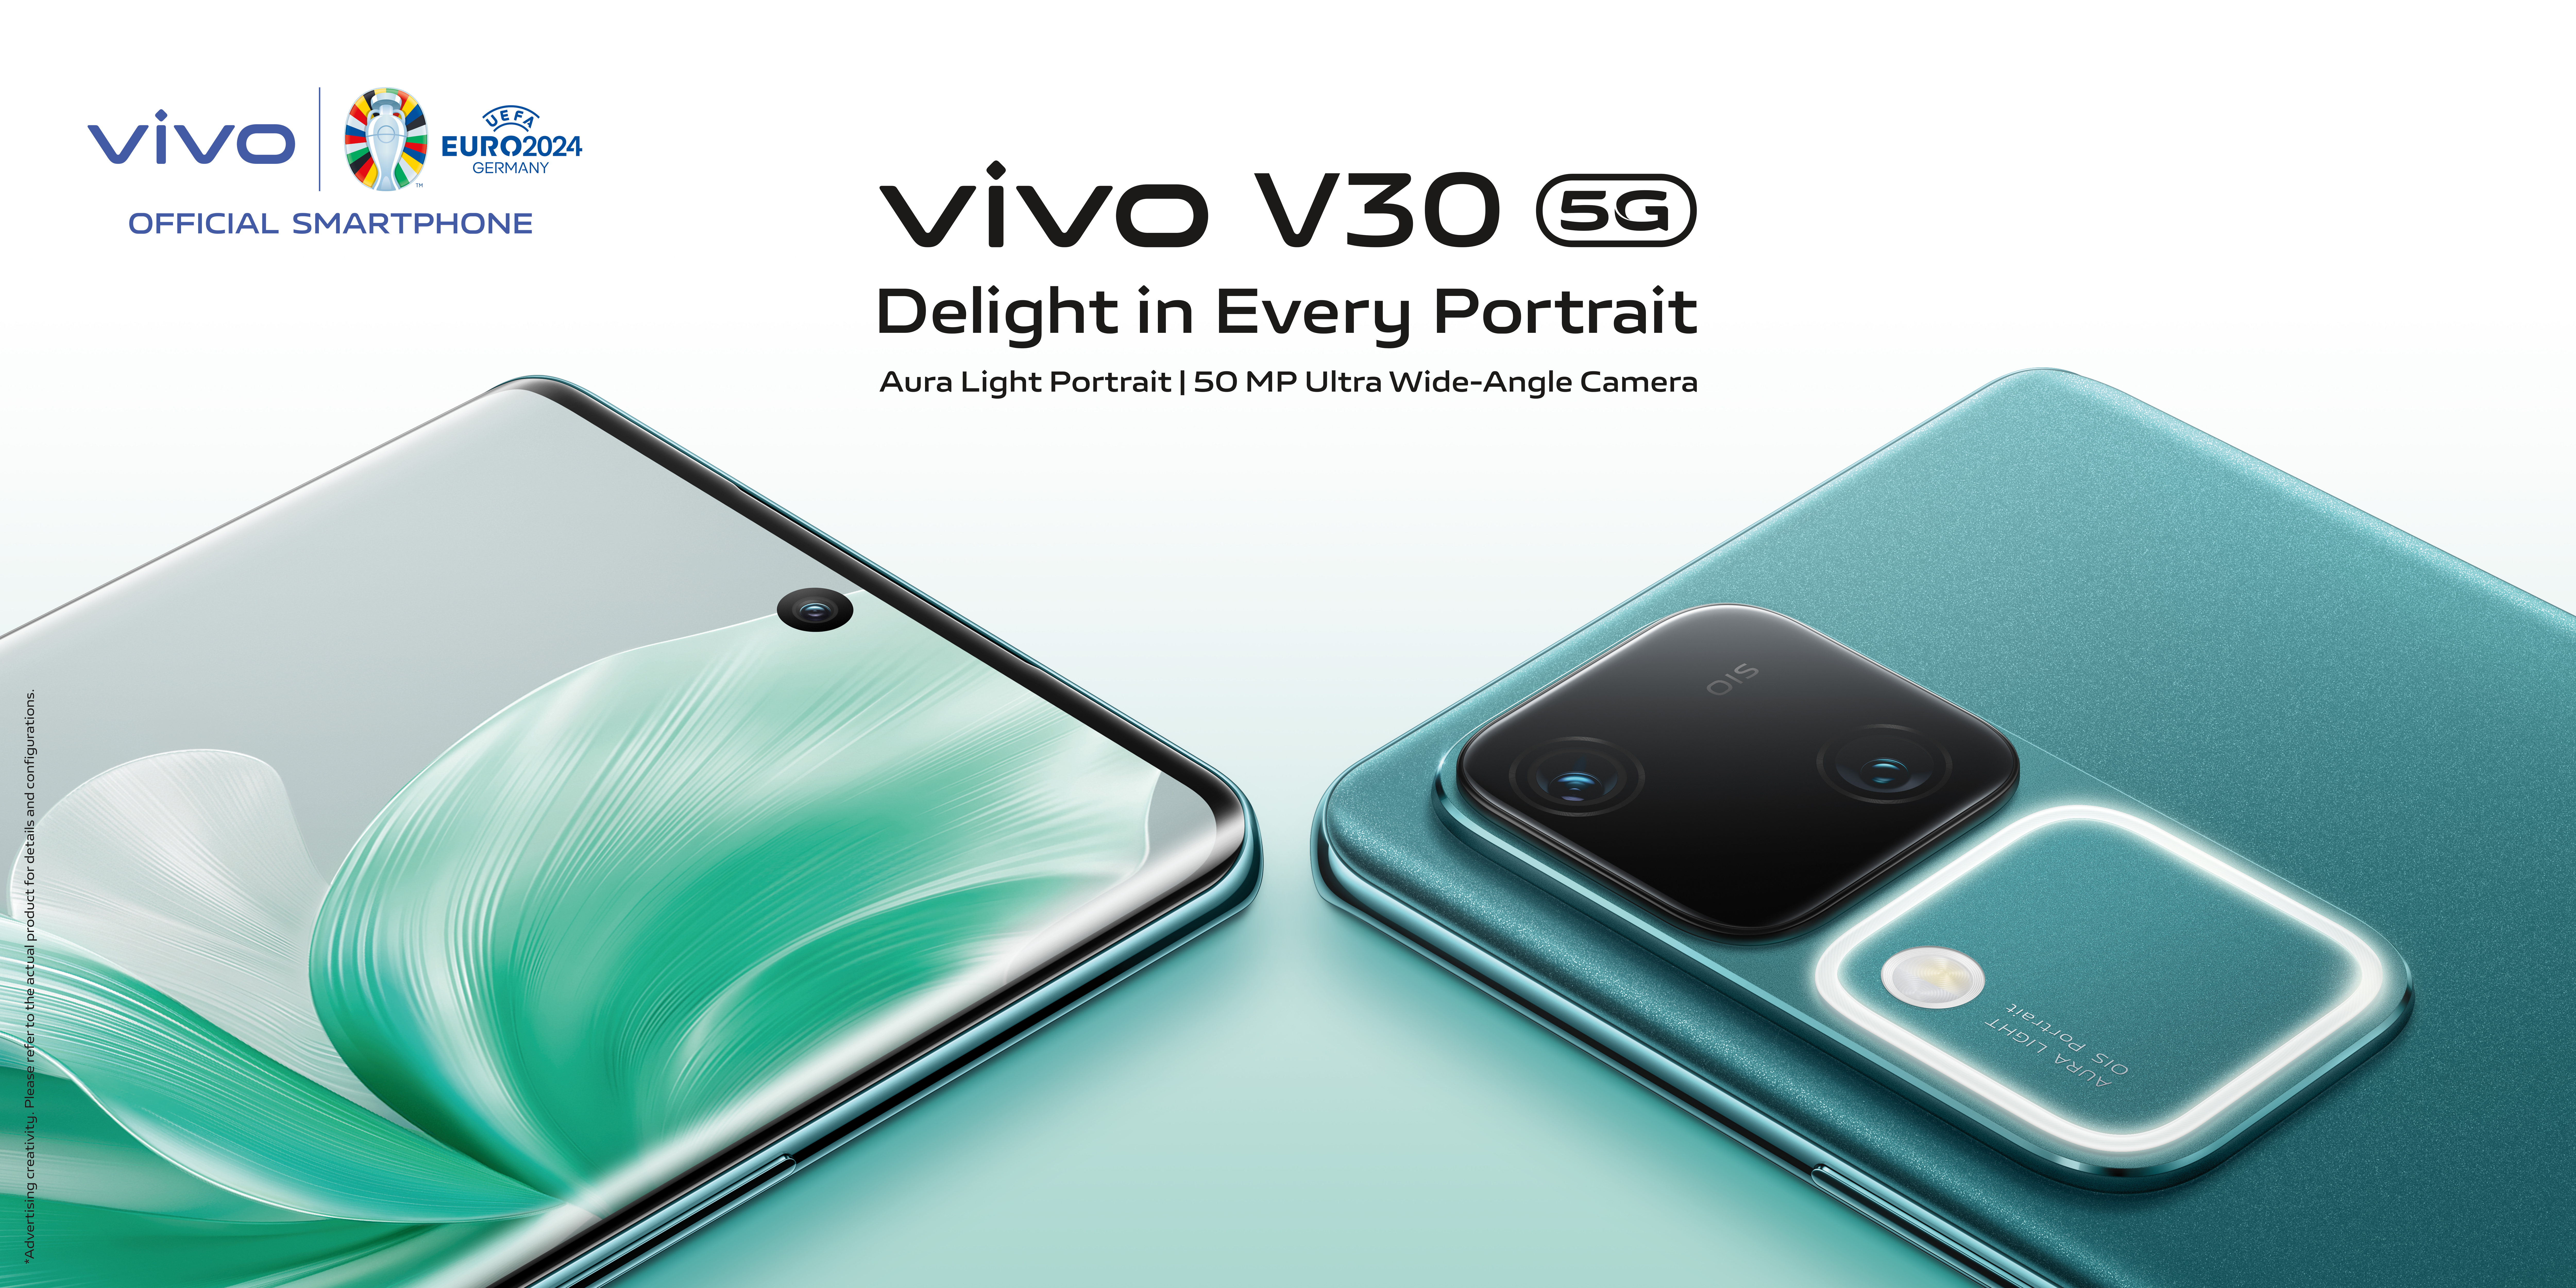 vivo ushers in a new era of portrait photography with the slim and premium - designed V30